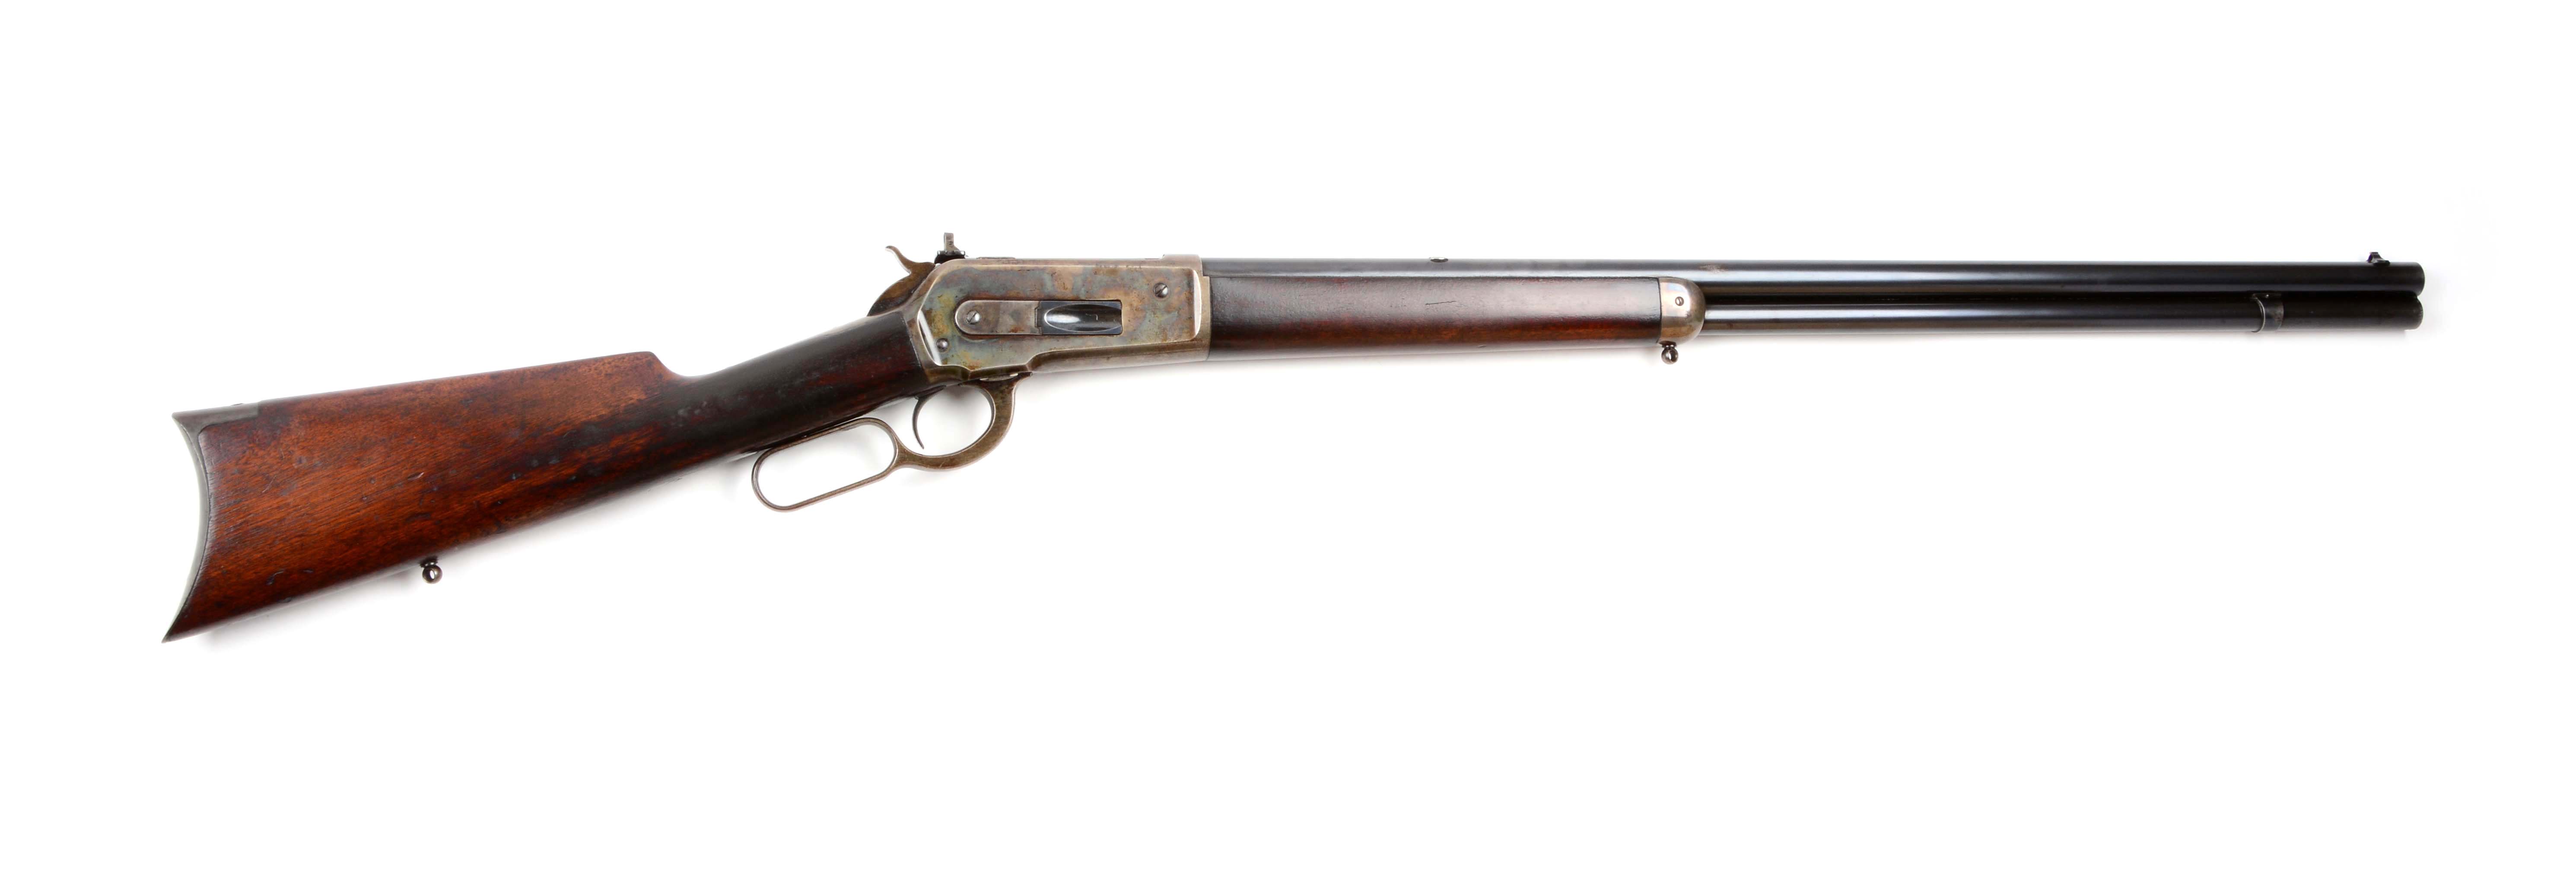 Special Order High Condition Winchester Model 1886 Caliber .40-70., estimated at $12,000-16,000.